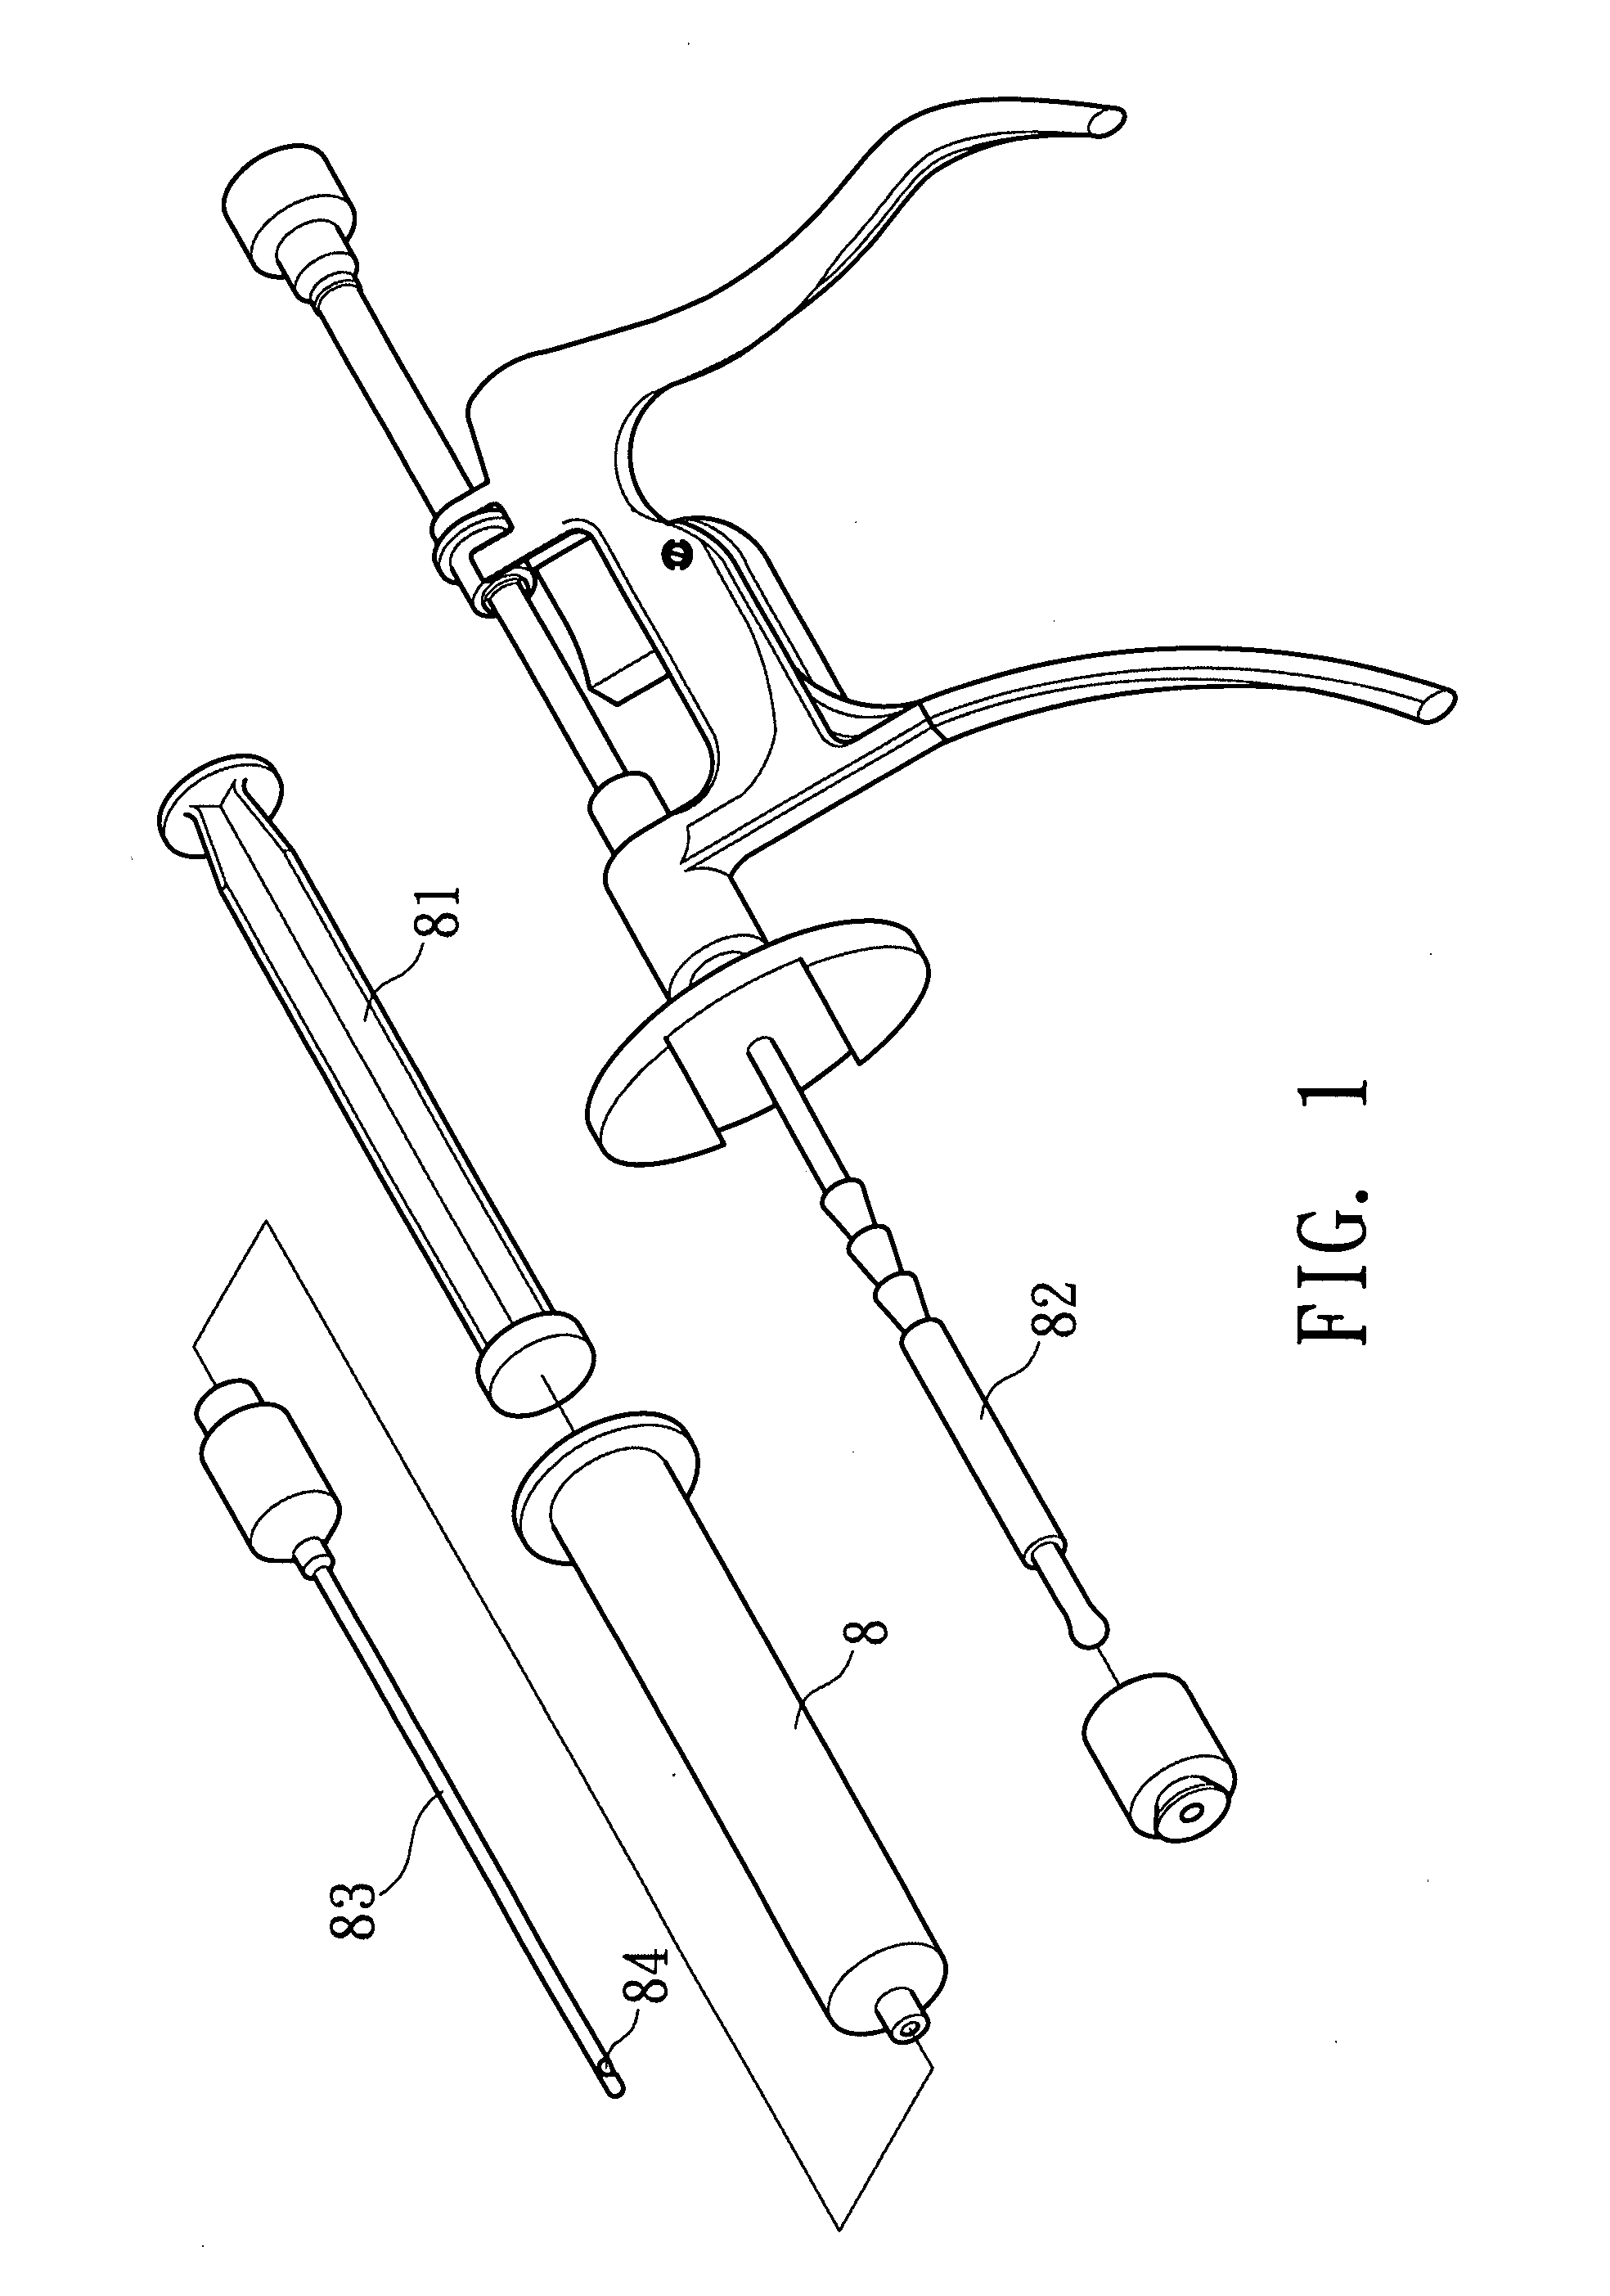 Volume adjustable, micro-injection device